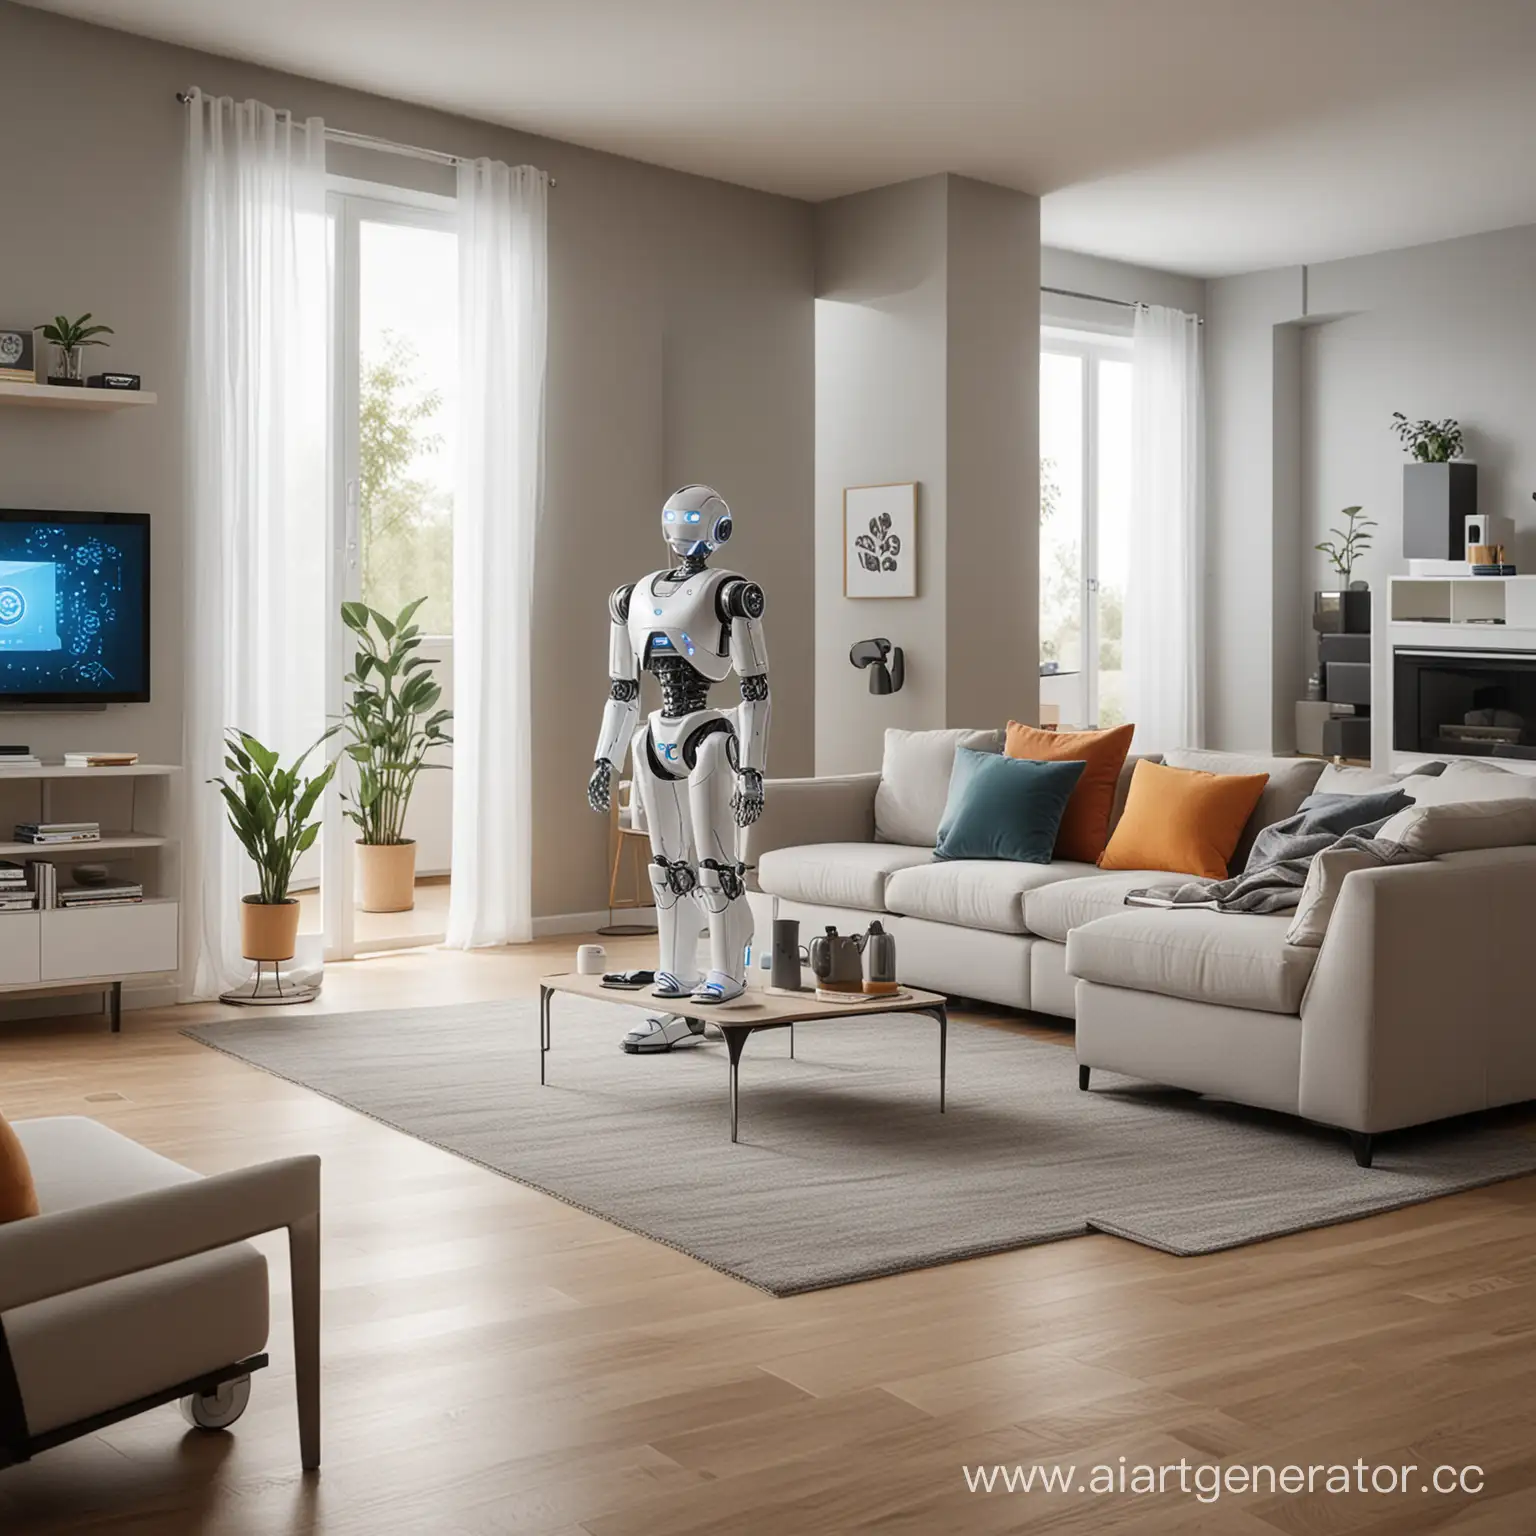 a living room where a robot rides and does everything around the house
; household appliances for the house of the future